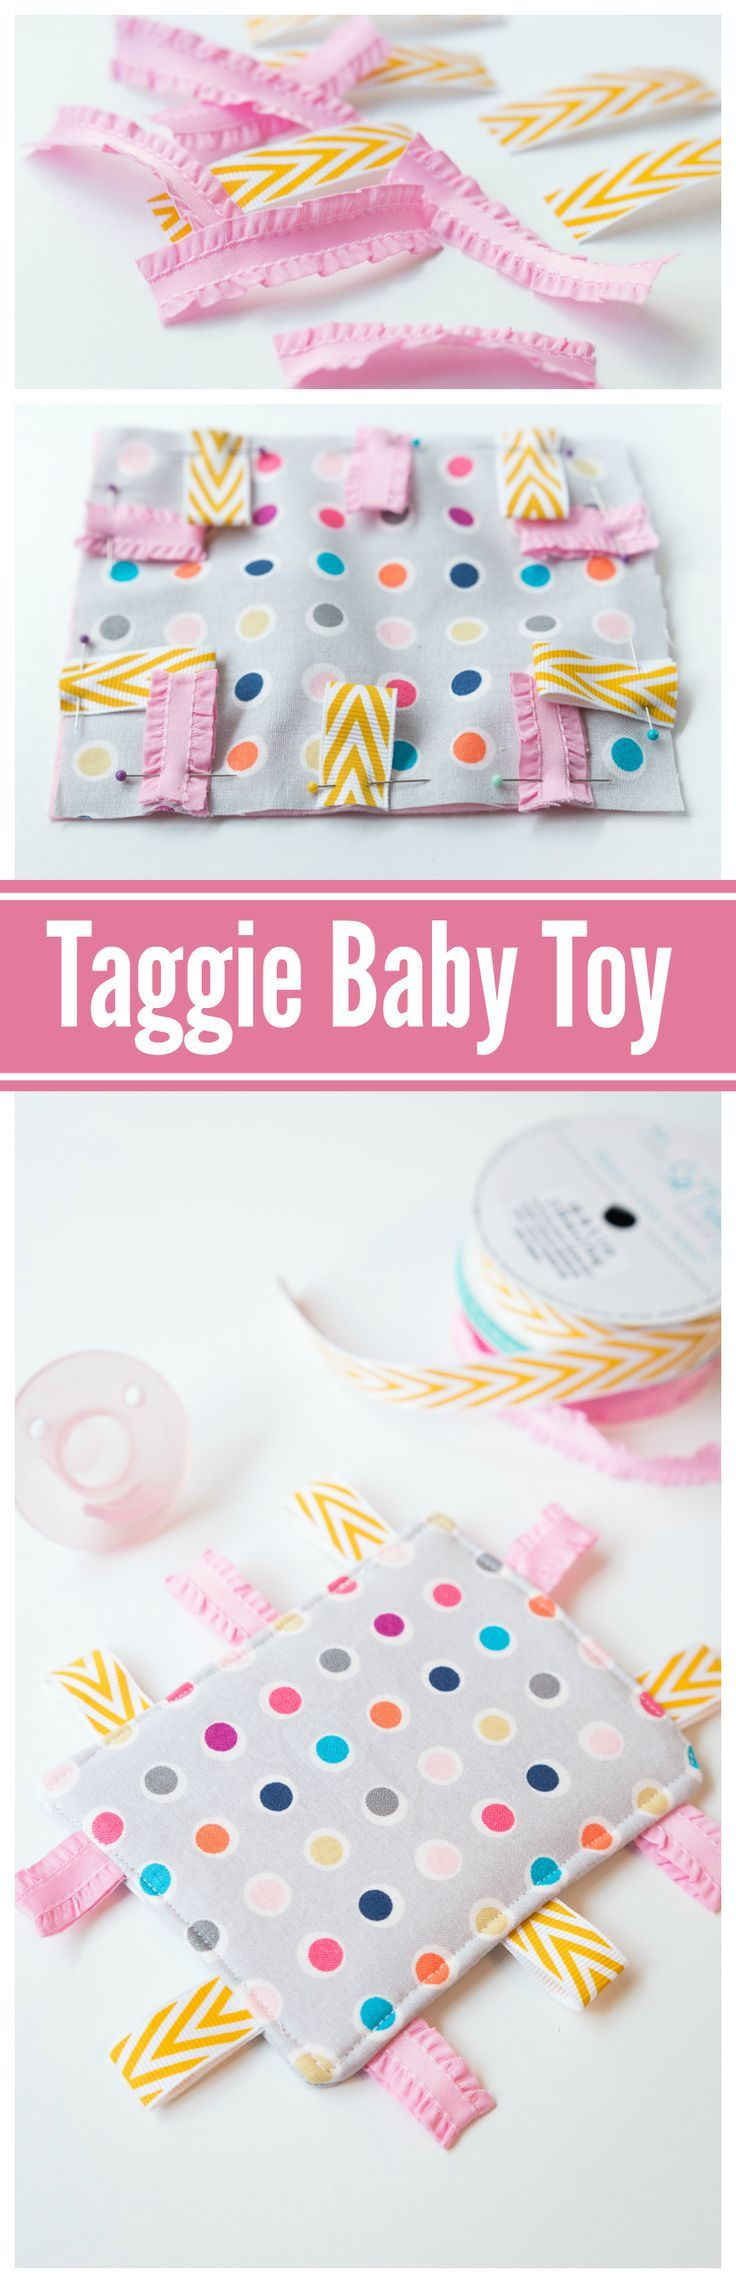 New Baby Crafts
 168 best images about Baby Play Ideas on Pinterest